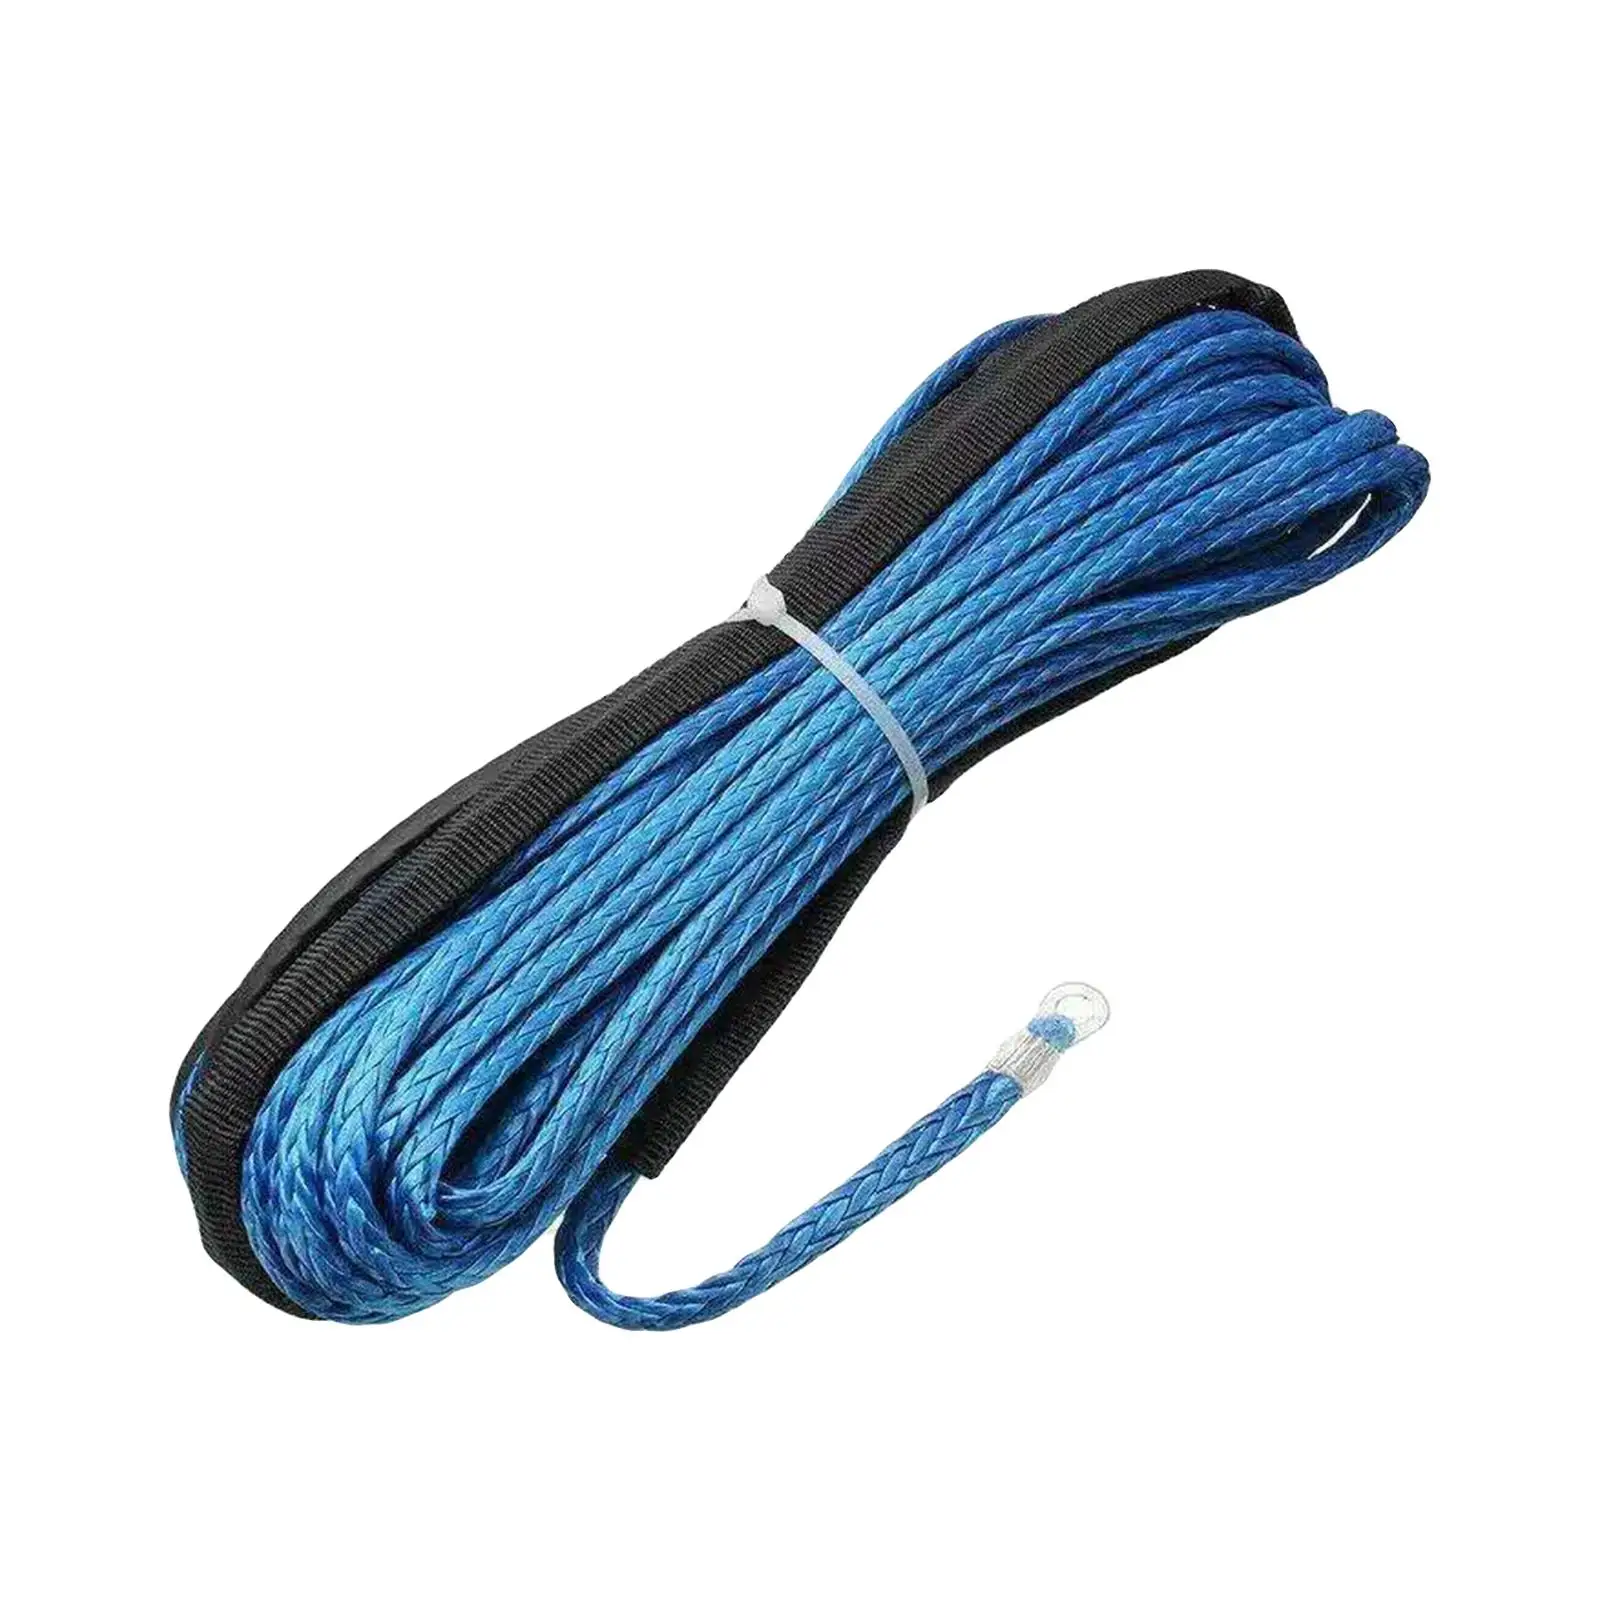 Synthetic Winch Rope 50` Belt Strap Car Breakdowns Towing Strap Rope Cars